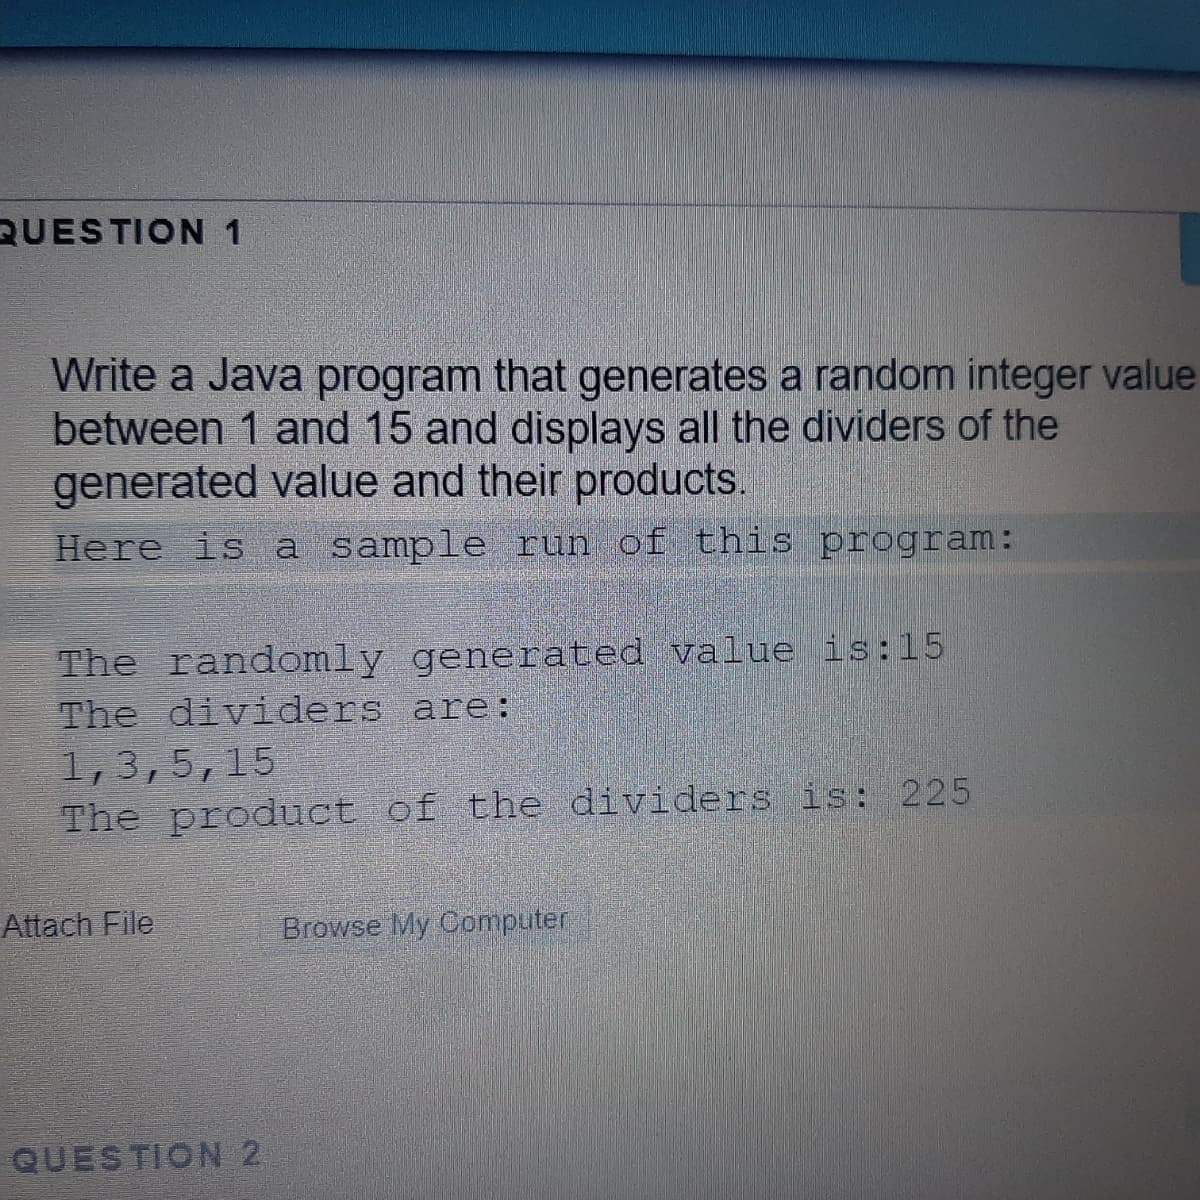 QUESTION 1
Write a Java program that generates a random integer value
between 1 and 15 and displays all the dividers of the
generated value and their products.
Here is a sample run of this program:
The randomly generated value is:15
The dividers are:
1,3,5,15
The product of the dividers is: 225
Attach File
Browse My Computer
QUESTION 2
